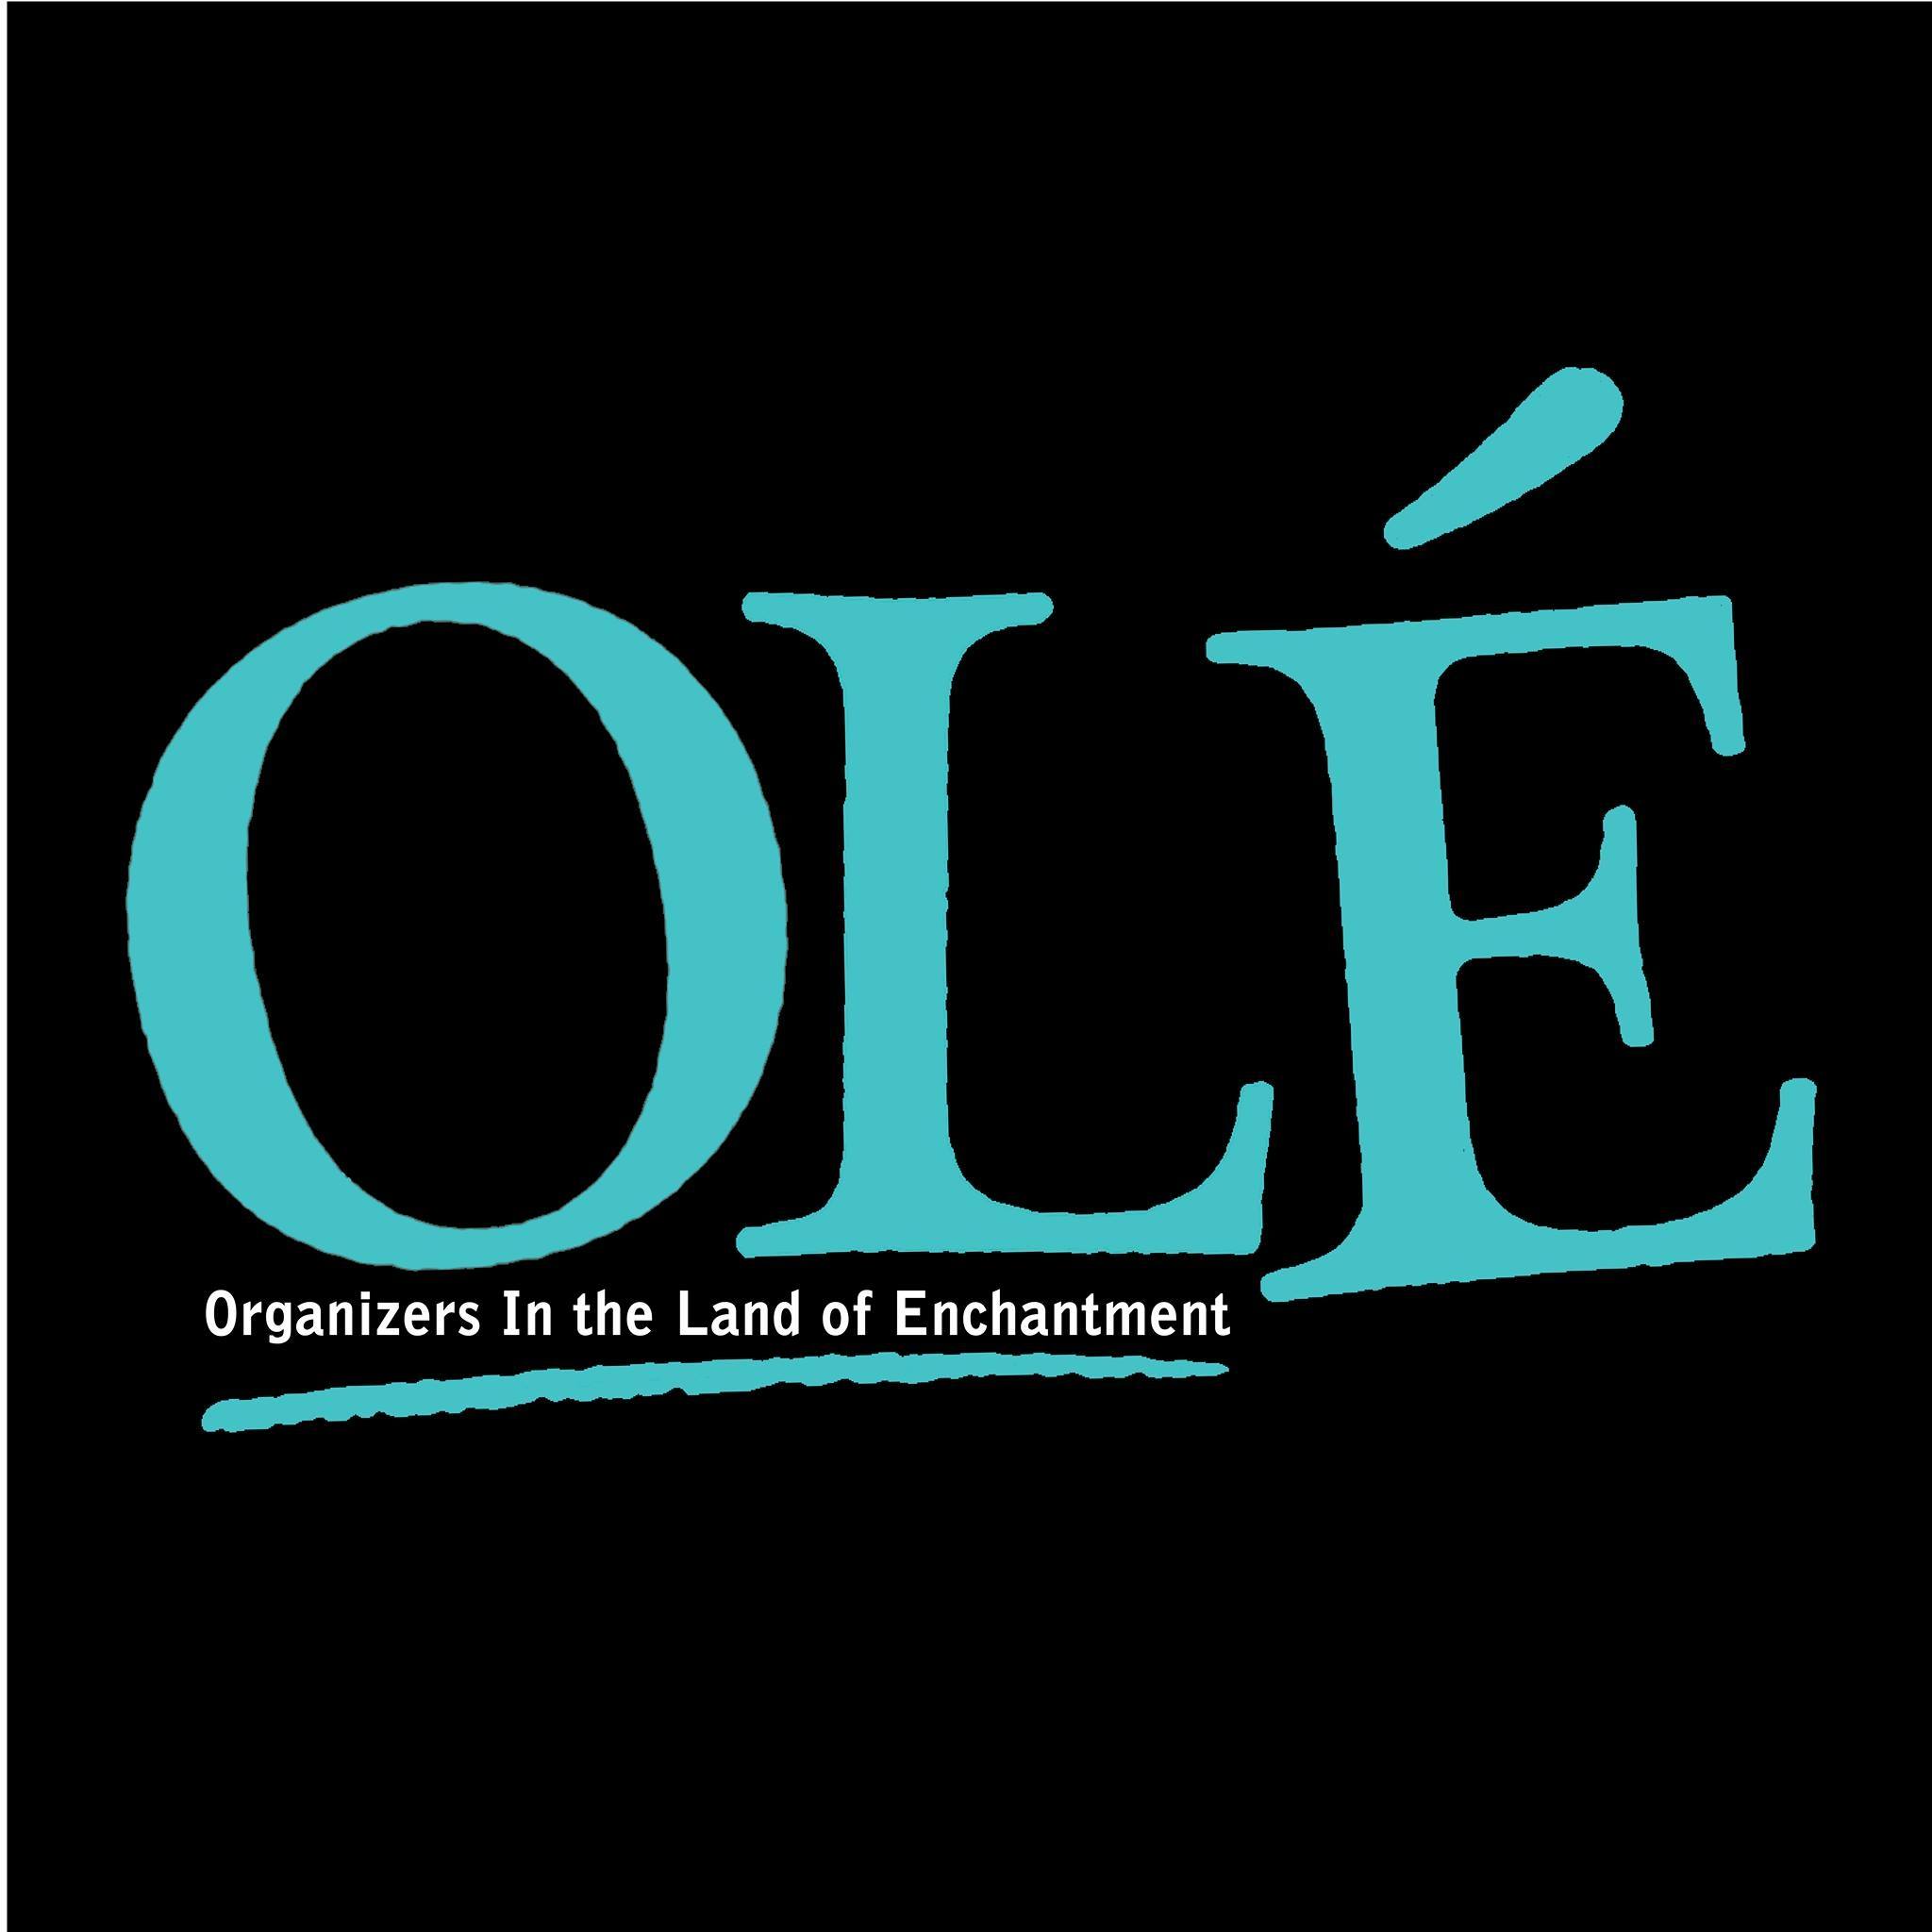 Organizers In the Land of Enchantment logo